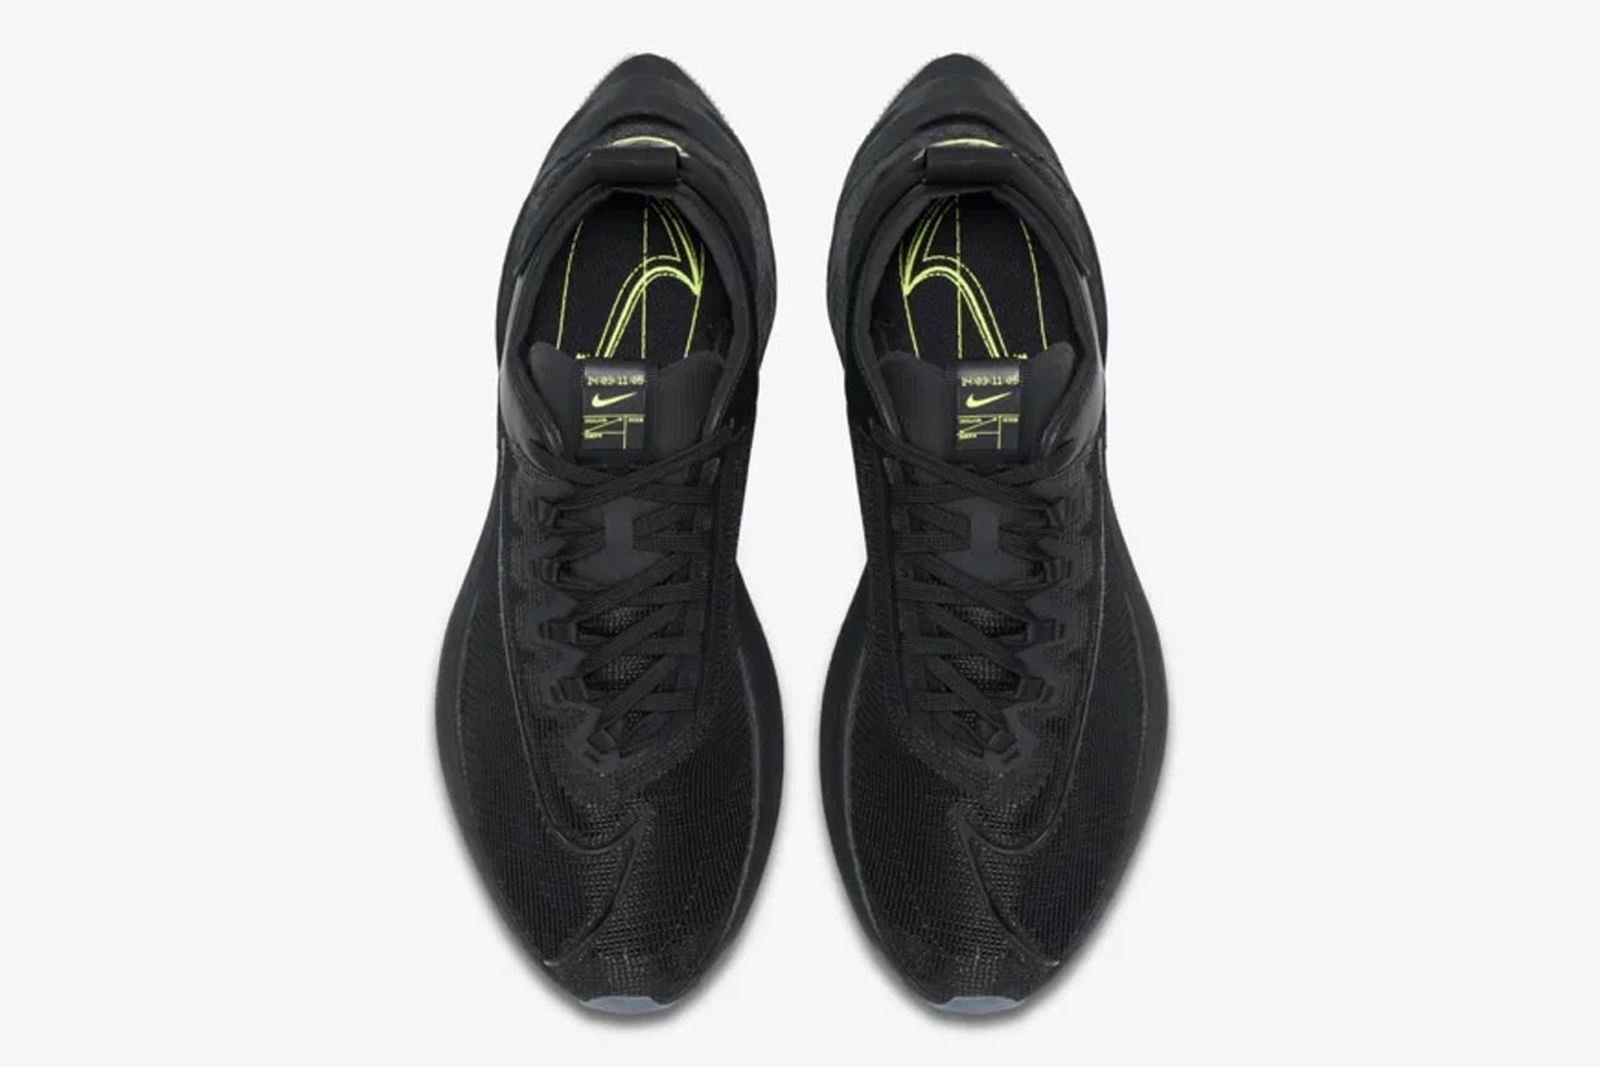 Nike Zoom Double Stacked Volt Black Product Shot